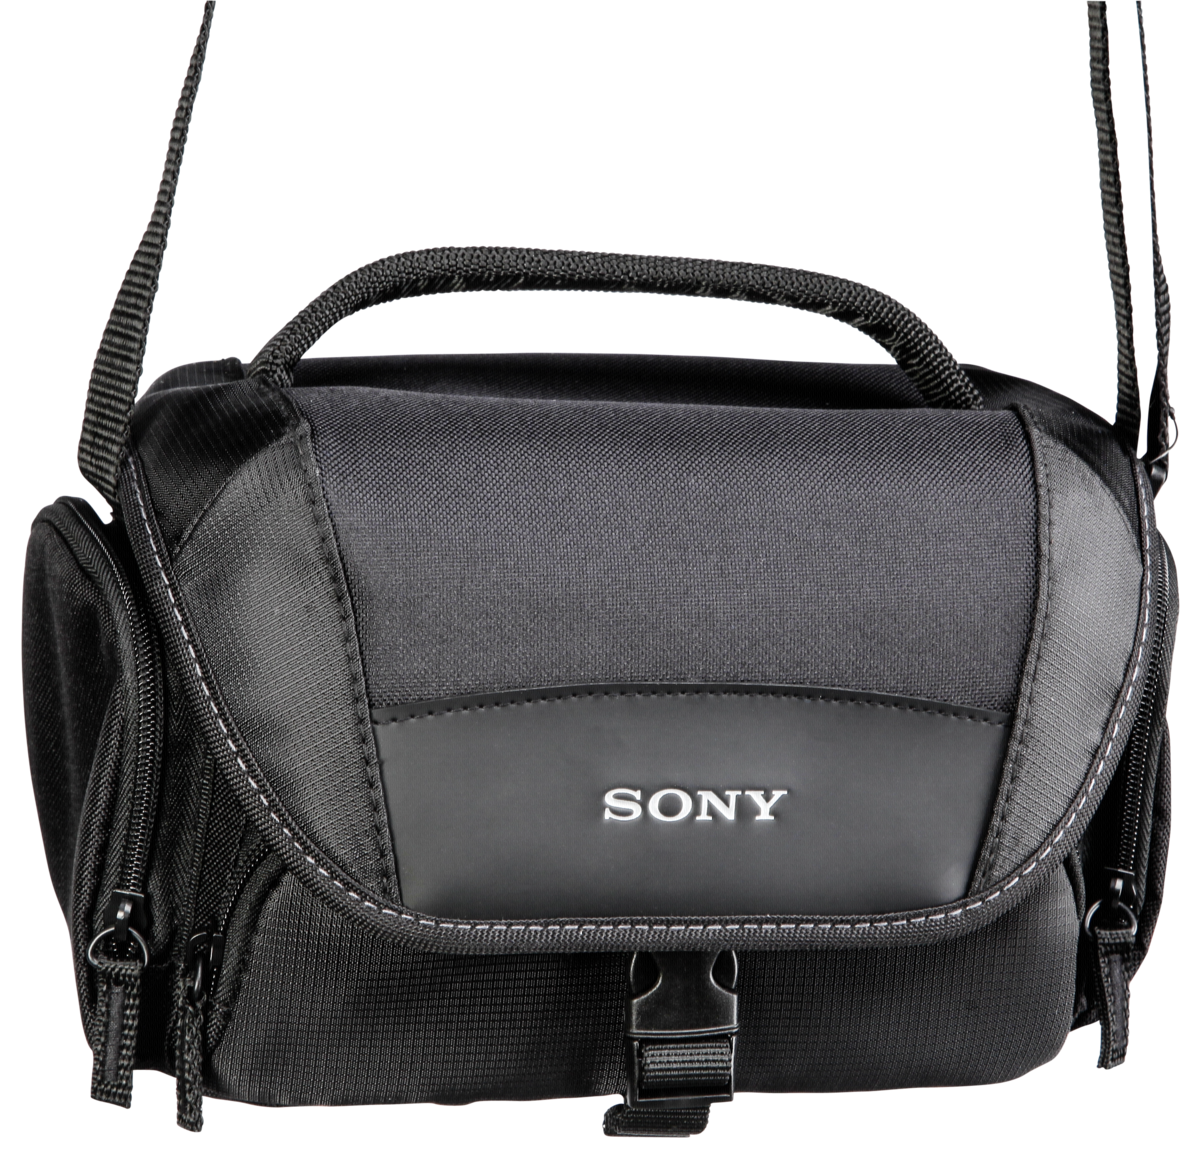 Sony LCS-U21 Soft Carrying Case for Sony FDR-AX53